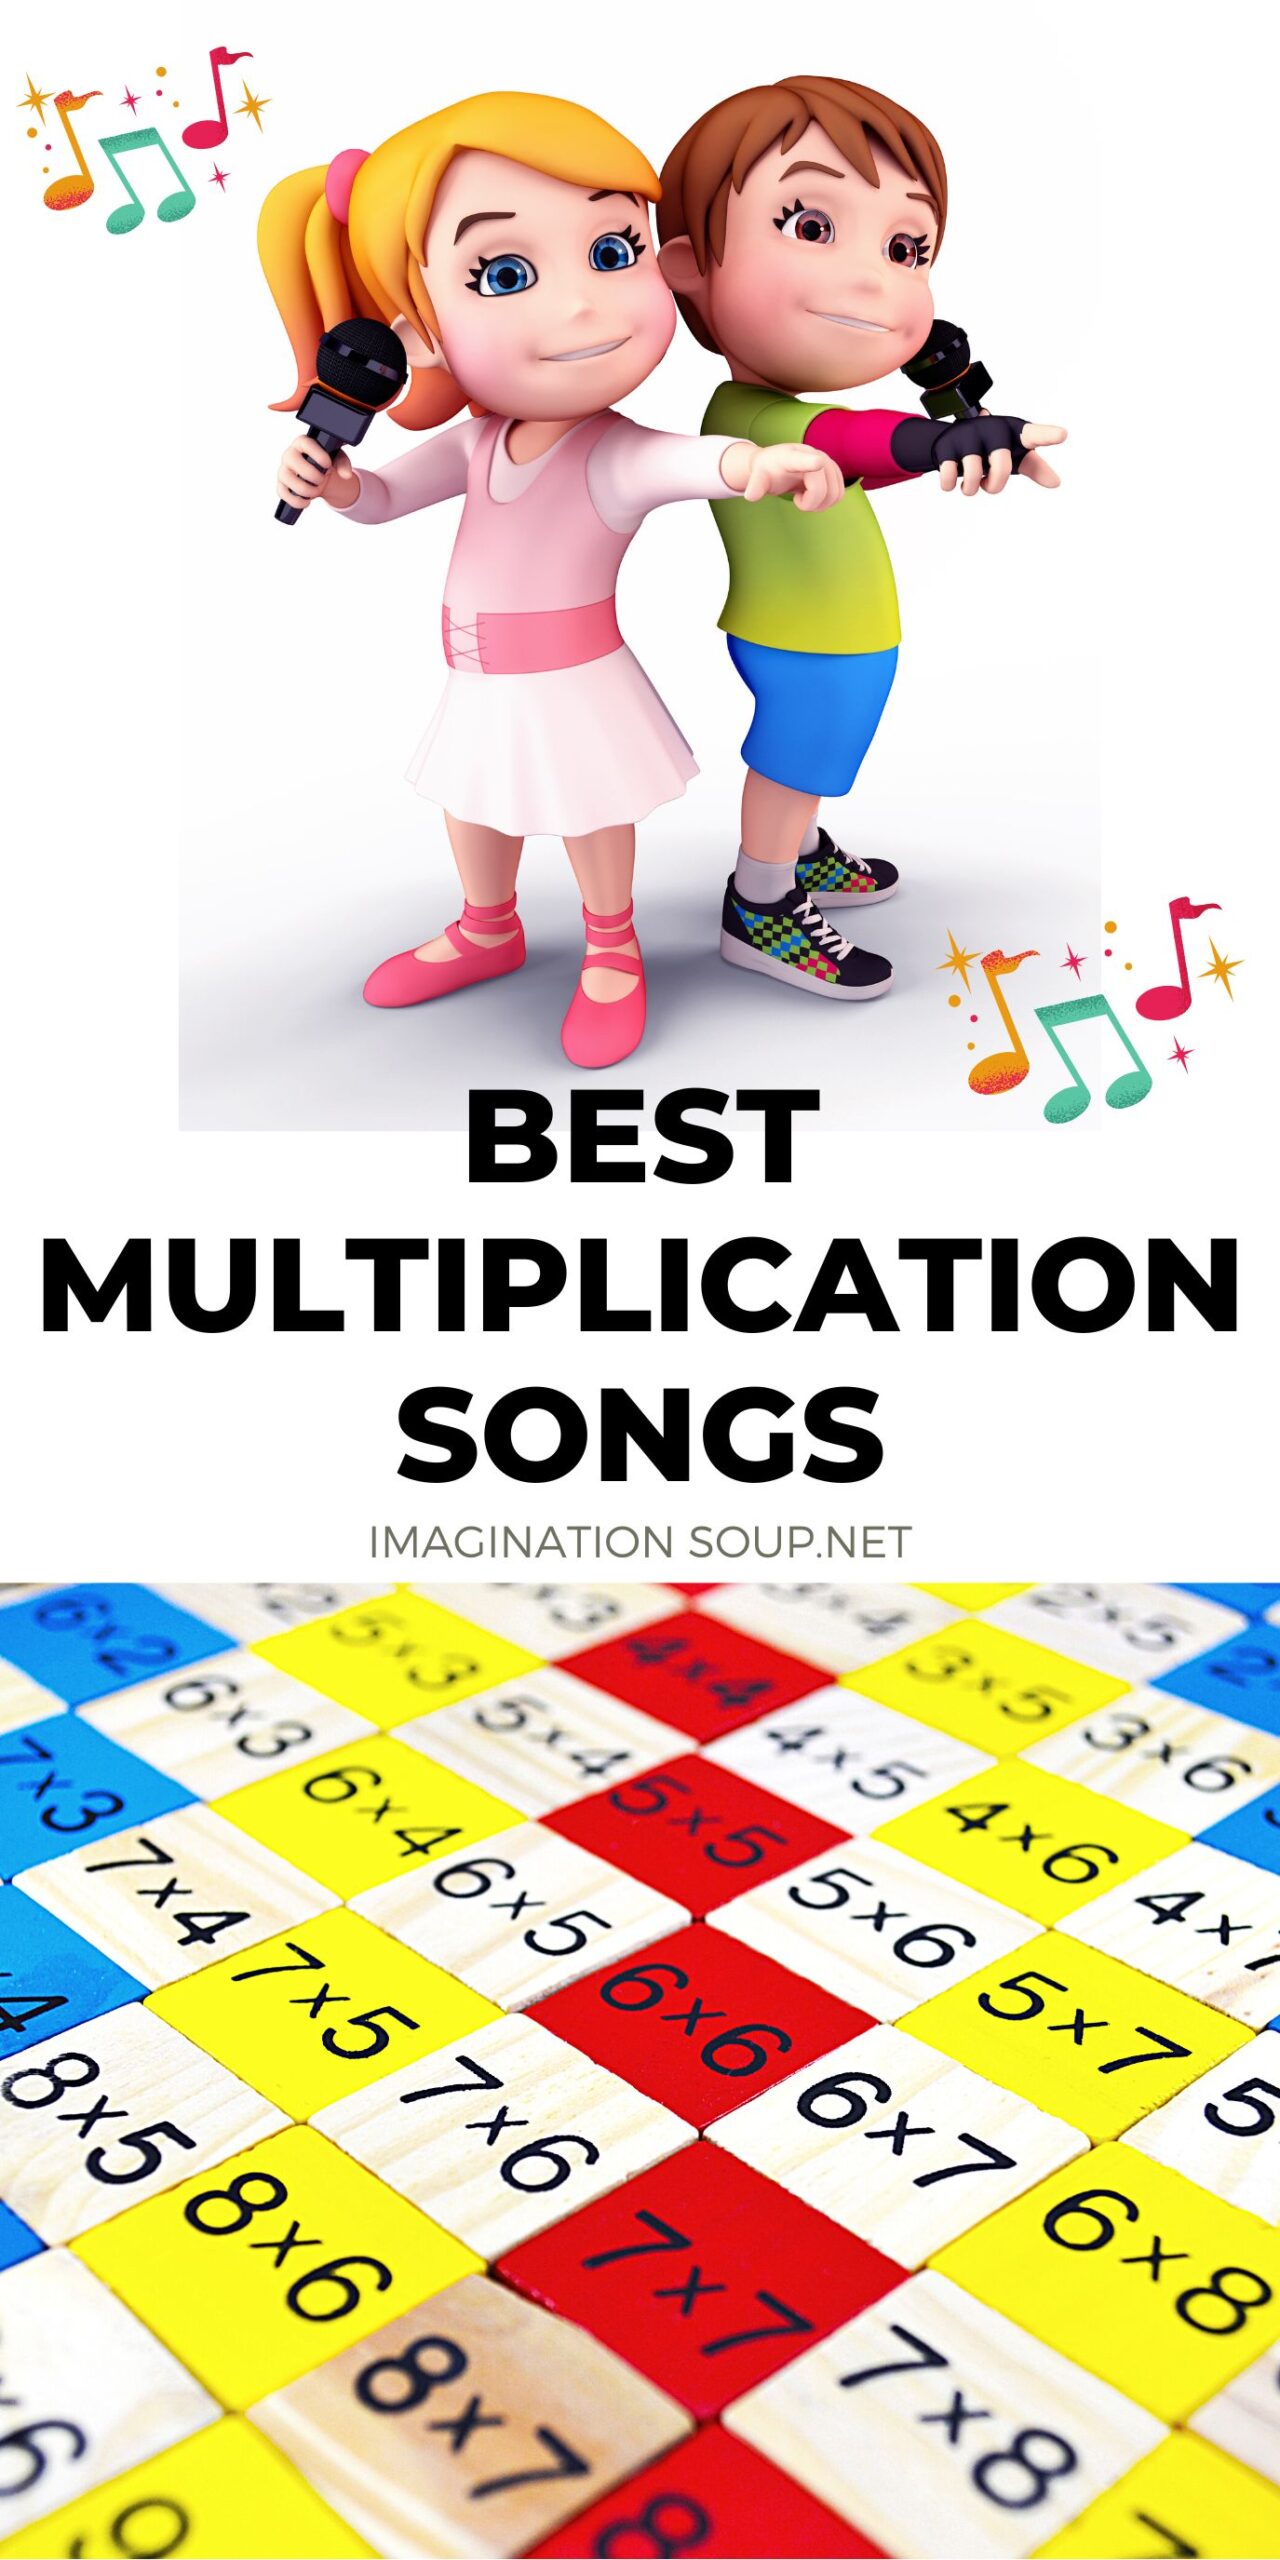 Download the best multiplication songs for your kids to learn their times tables. This works really well if your children love music and learn best with music. (Which was ME when I was a kid!)